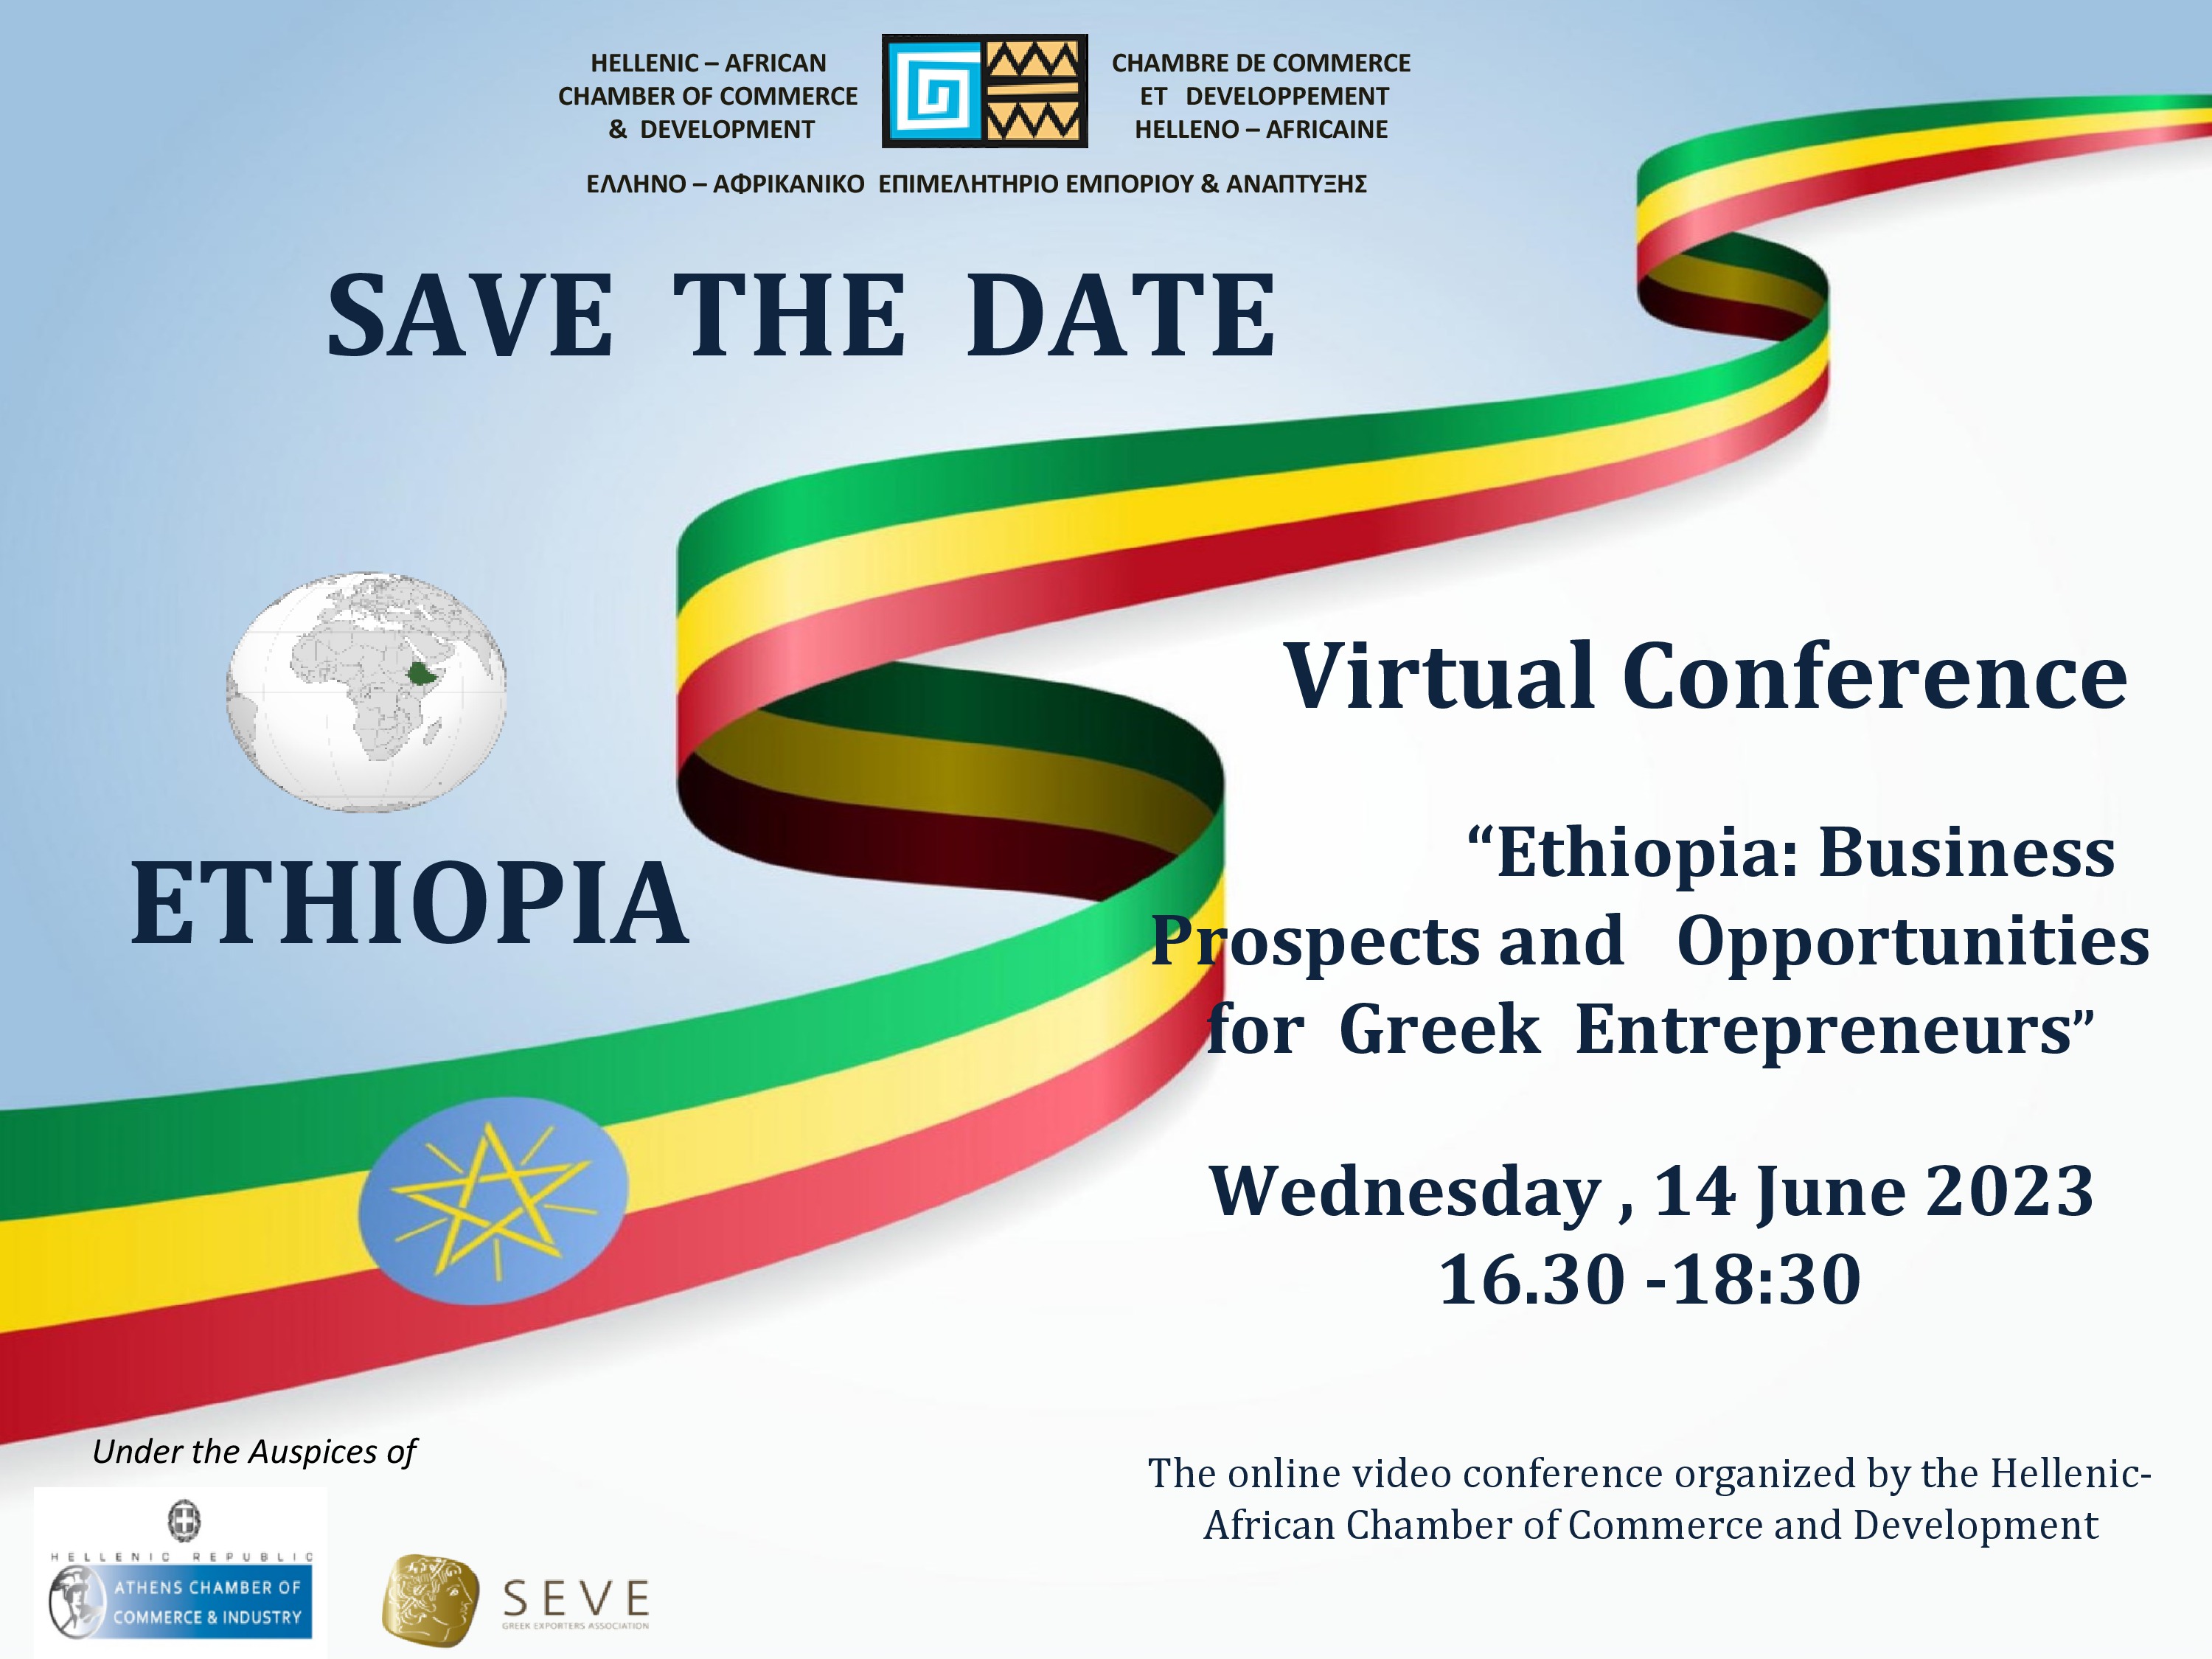 Invitation : Virtual Conference  " Ethiopia: Business Prospects and Opportunities for Greek Entepreneurs" 